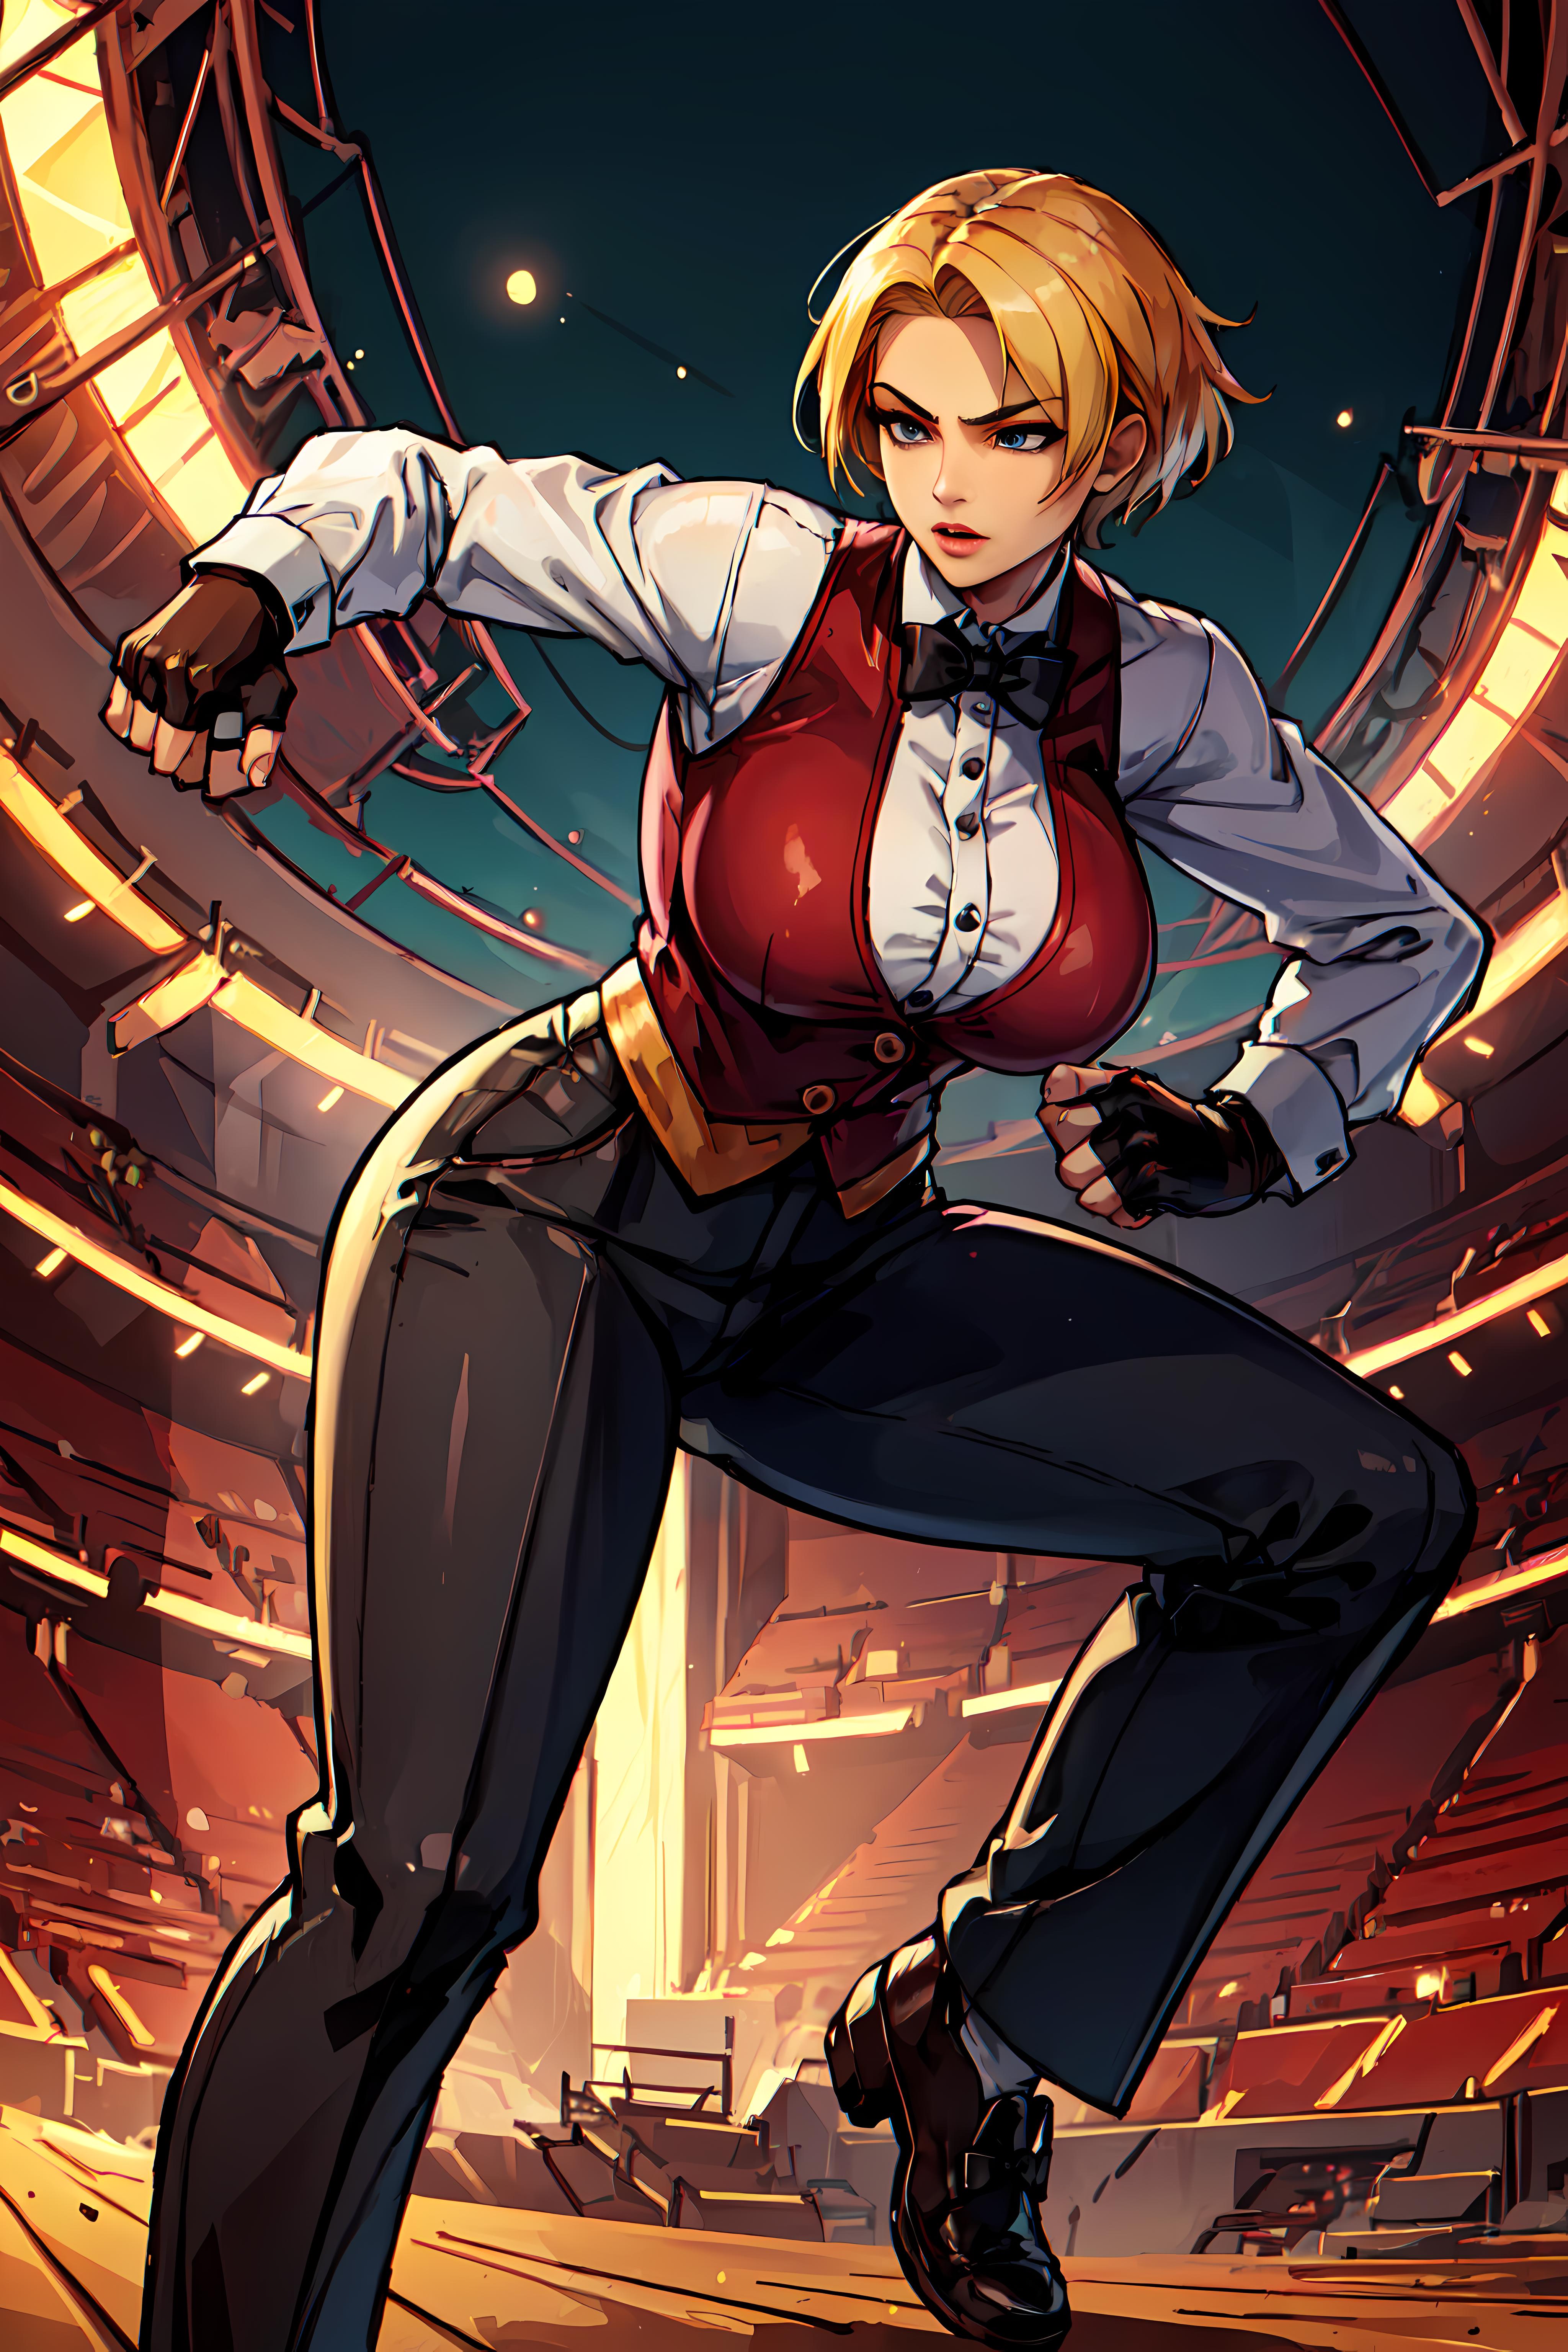 King (The King of Fighters) LoRA image by betweenspectrums